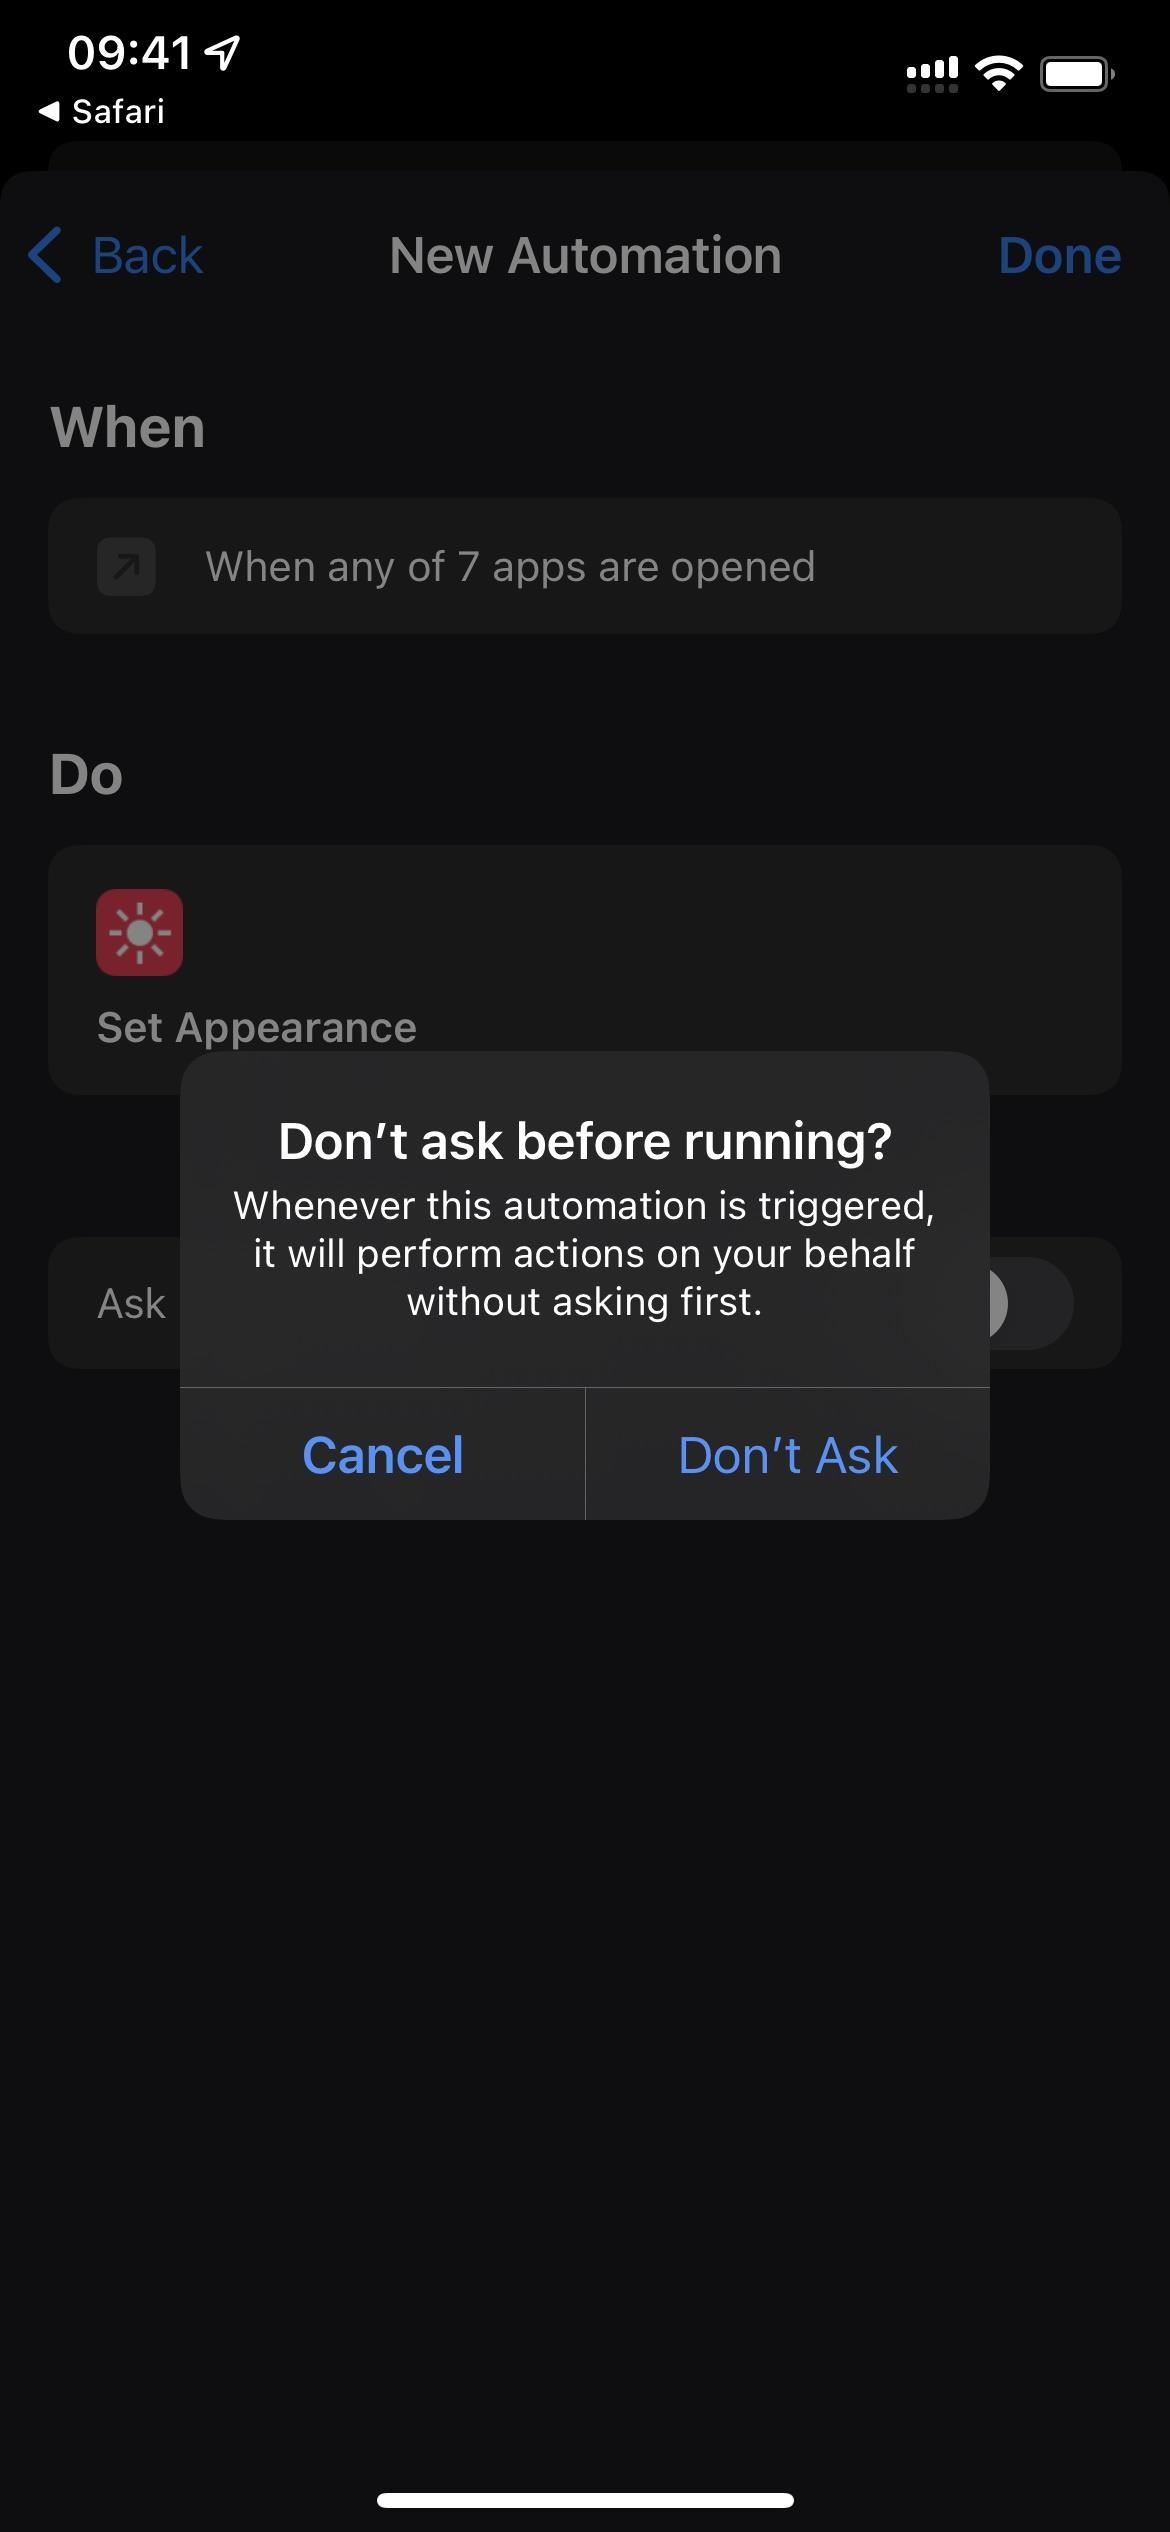 Force Per-App Dark Mode Settings by Bypassing Your iPhone's System-Wide Theme